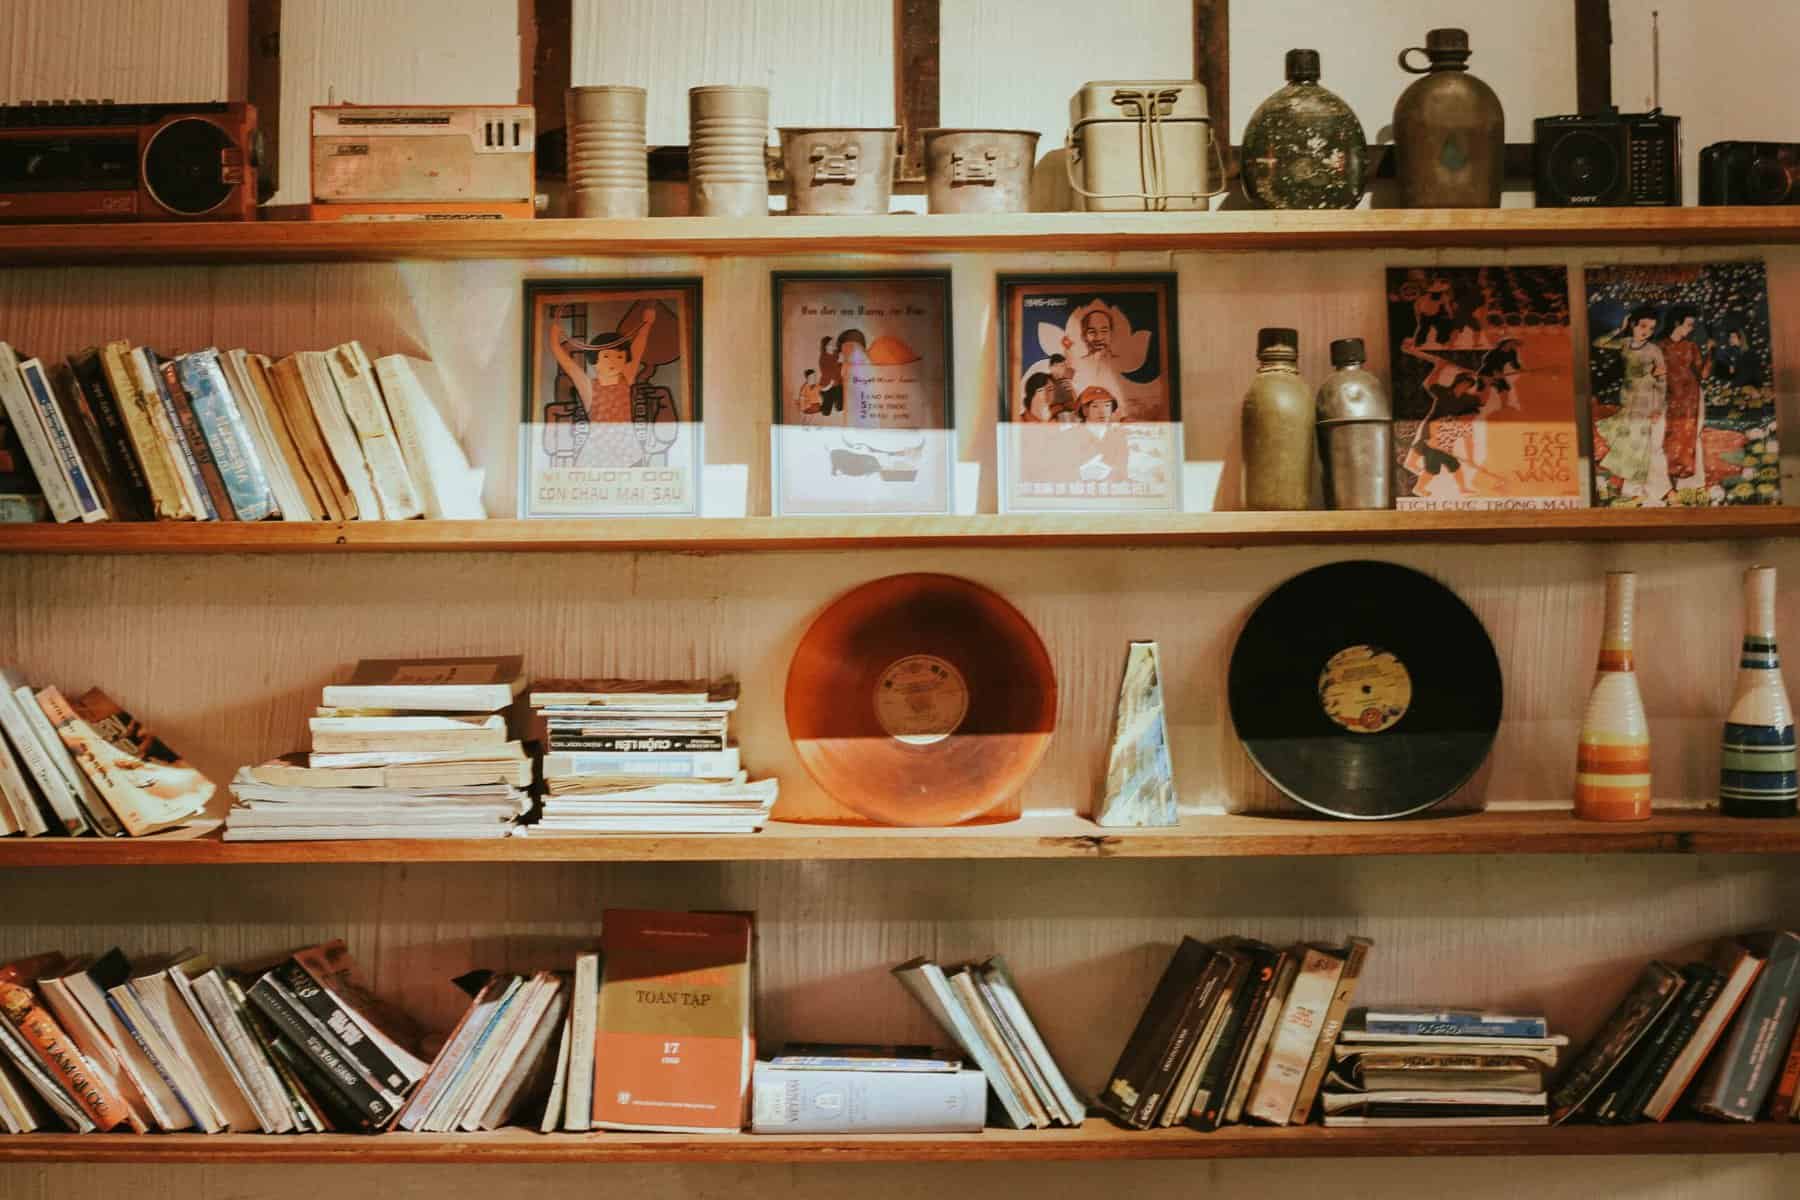 Bookshelves with books and vinyl records in Vietnam